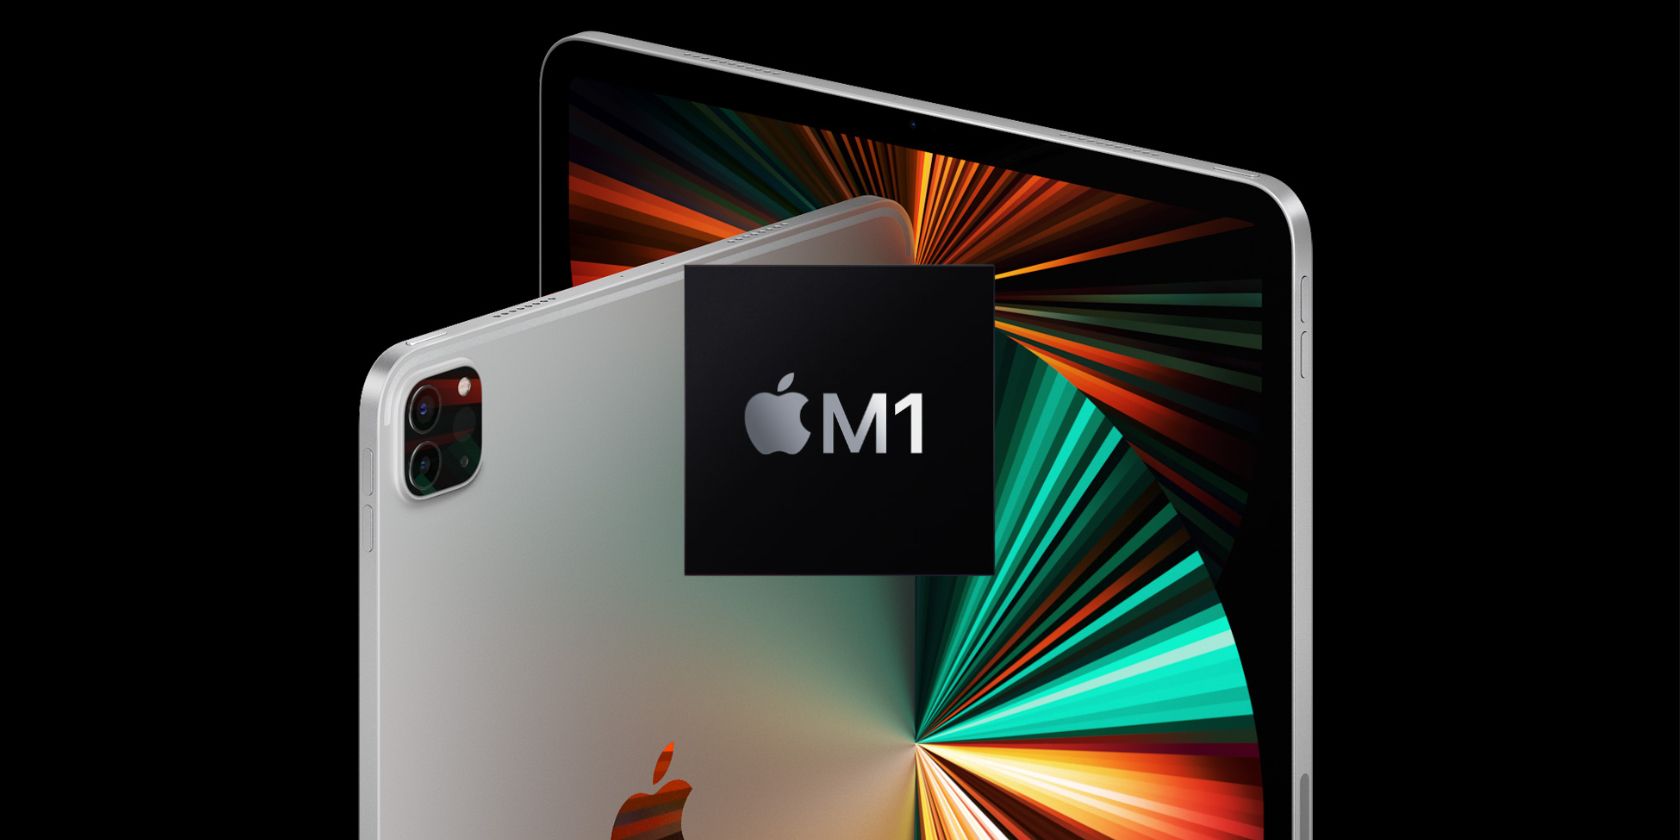 The new iPad Pro with an image of the M1 chip in the foreground